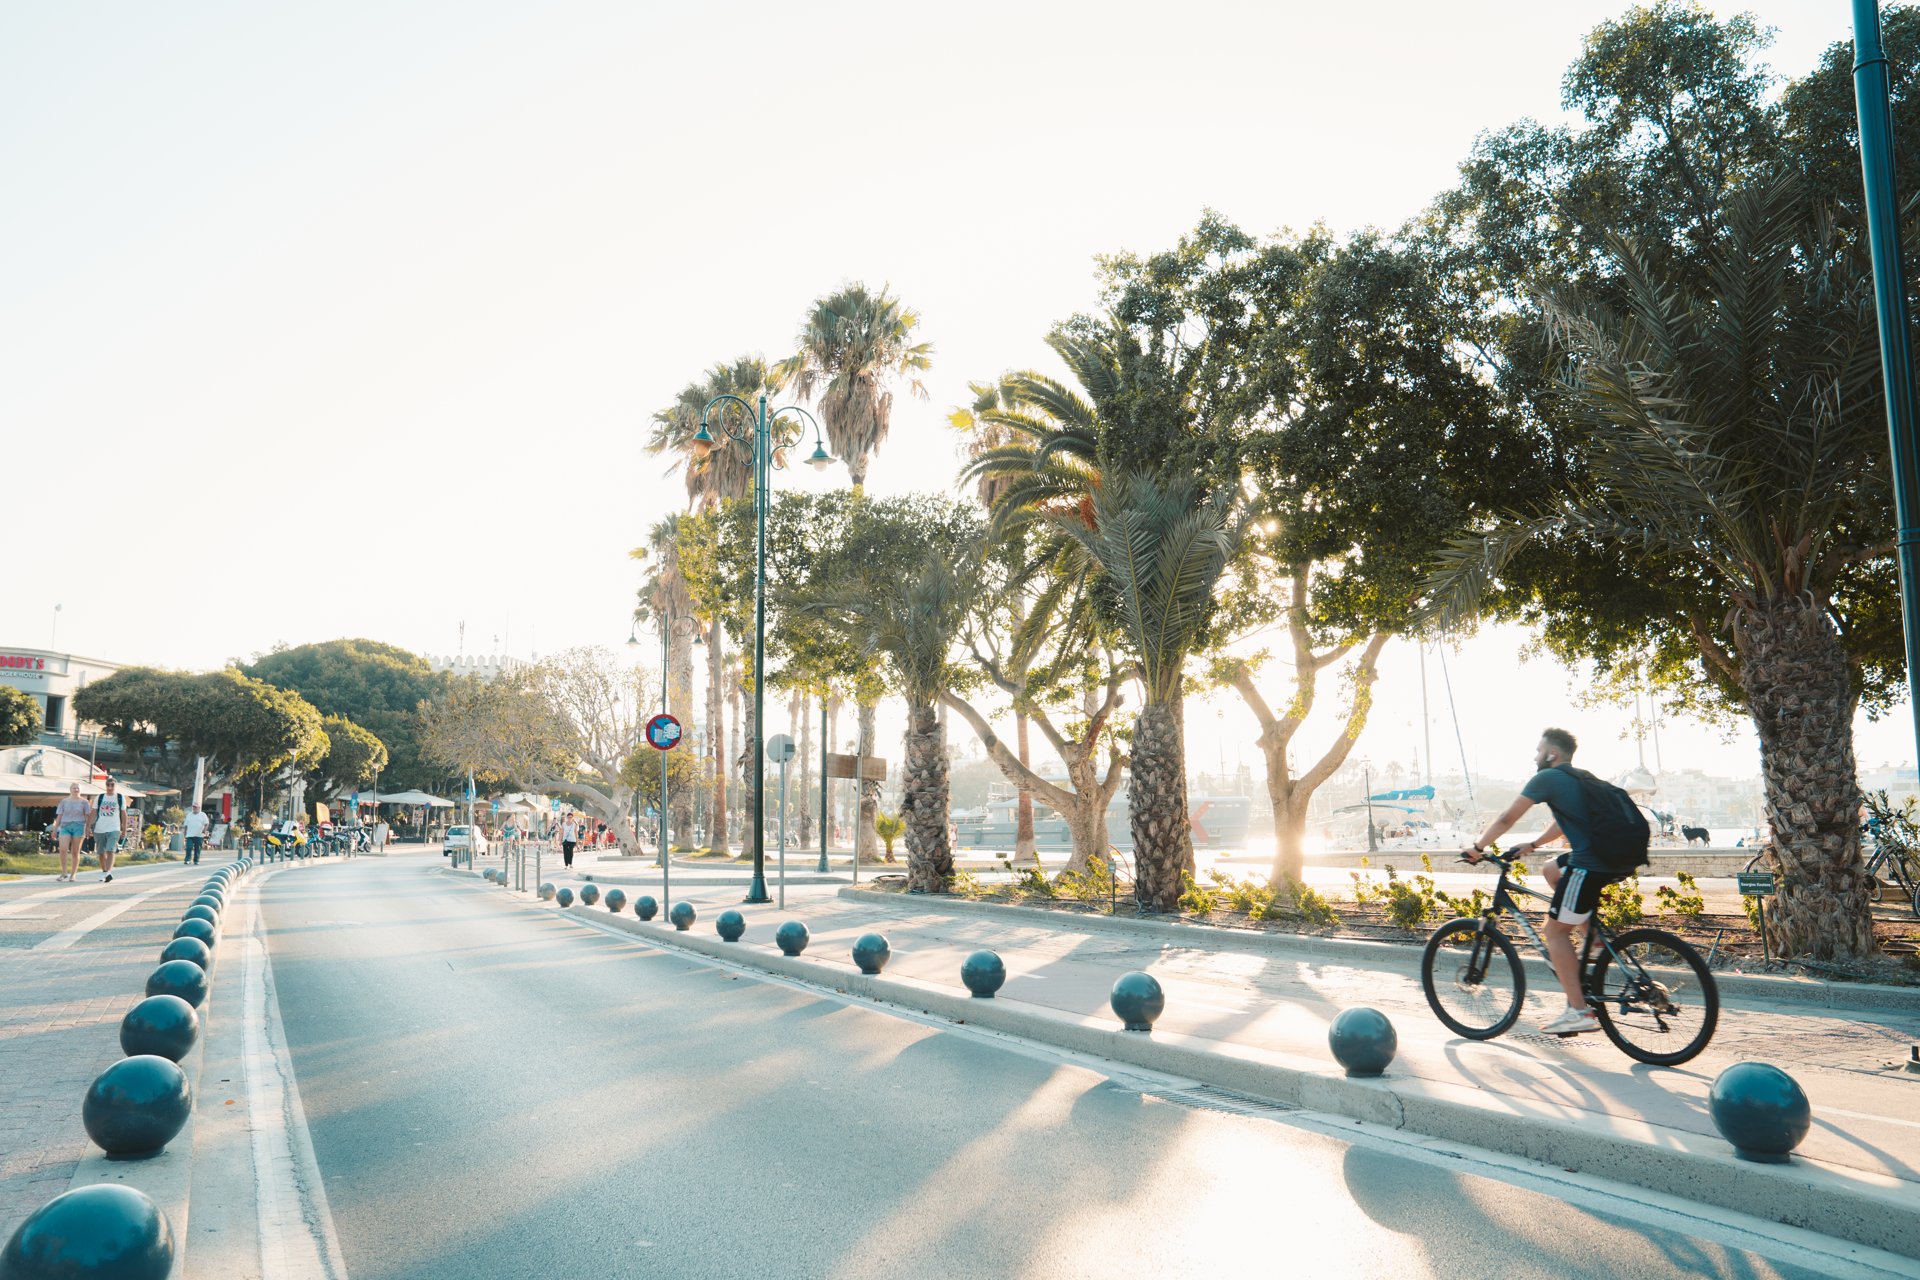 Kos has a 13km cycle lane stretching right along the waterfront